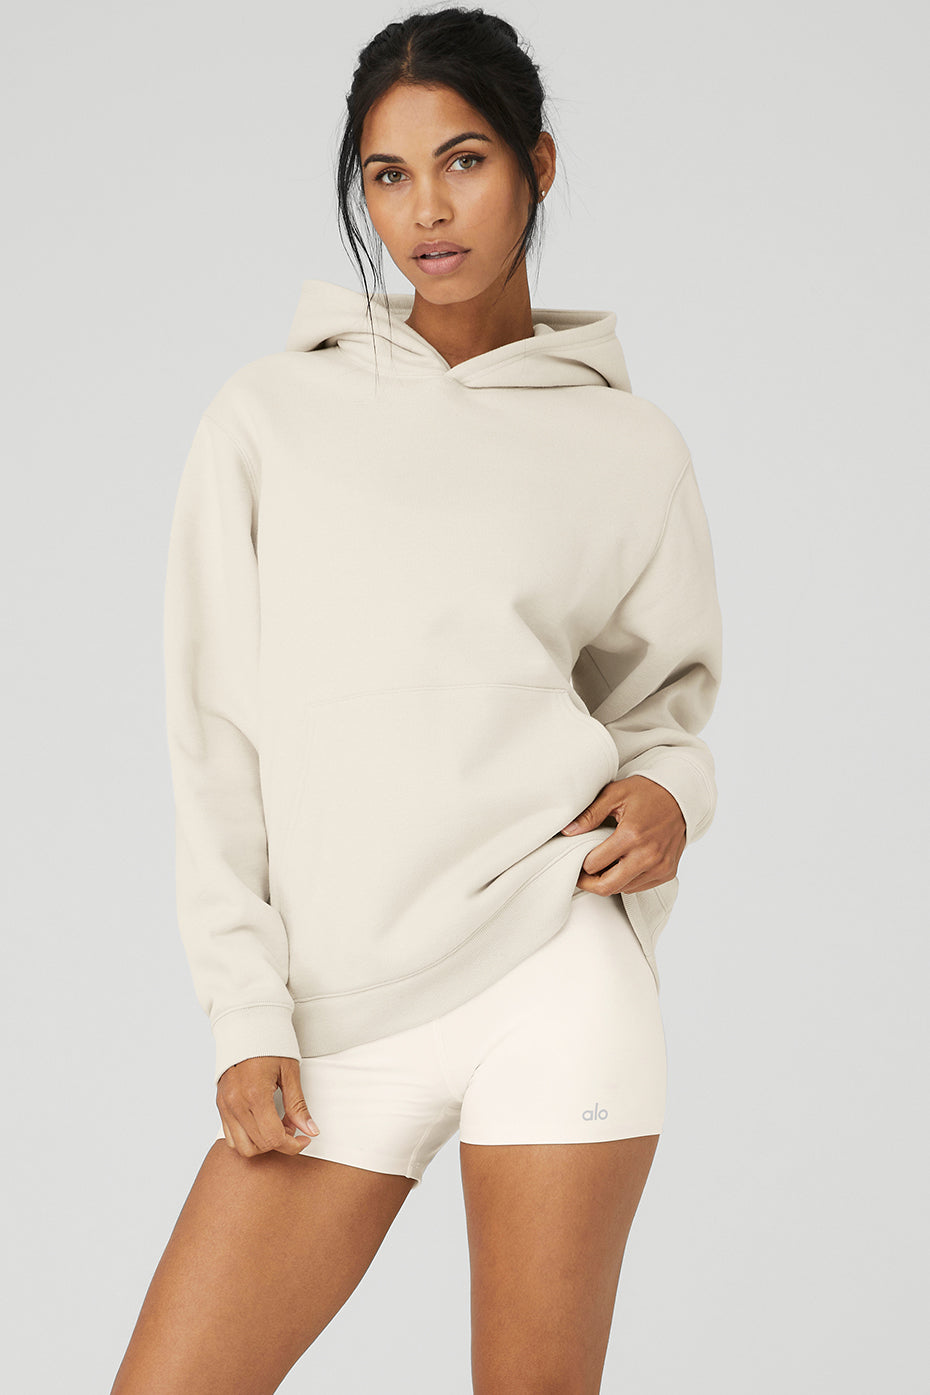 Only 51.20 usd for Accolade Hoodie - Athletic Heather Grey Online at the  Shop